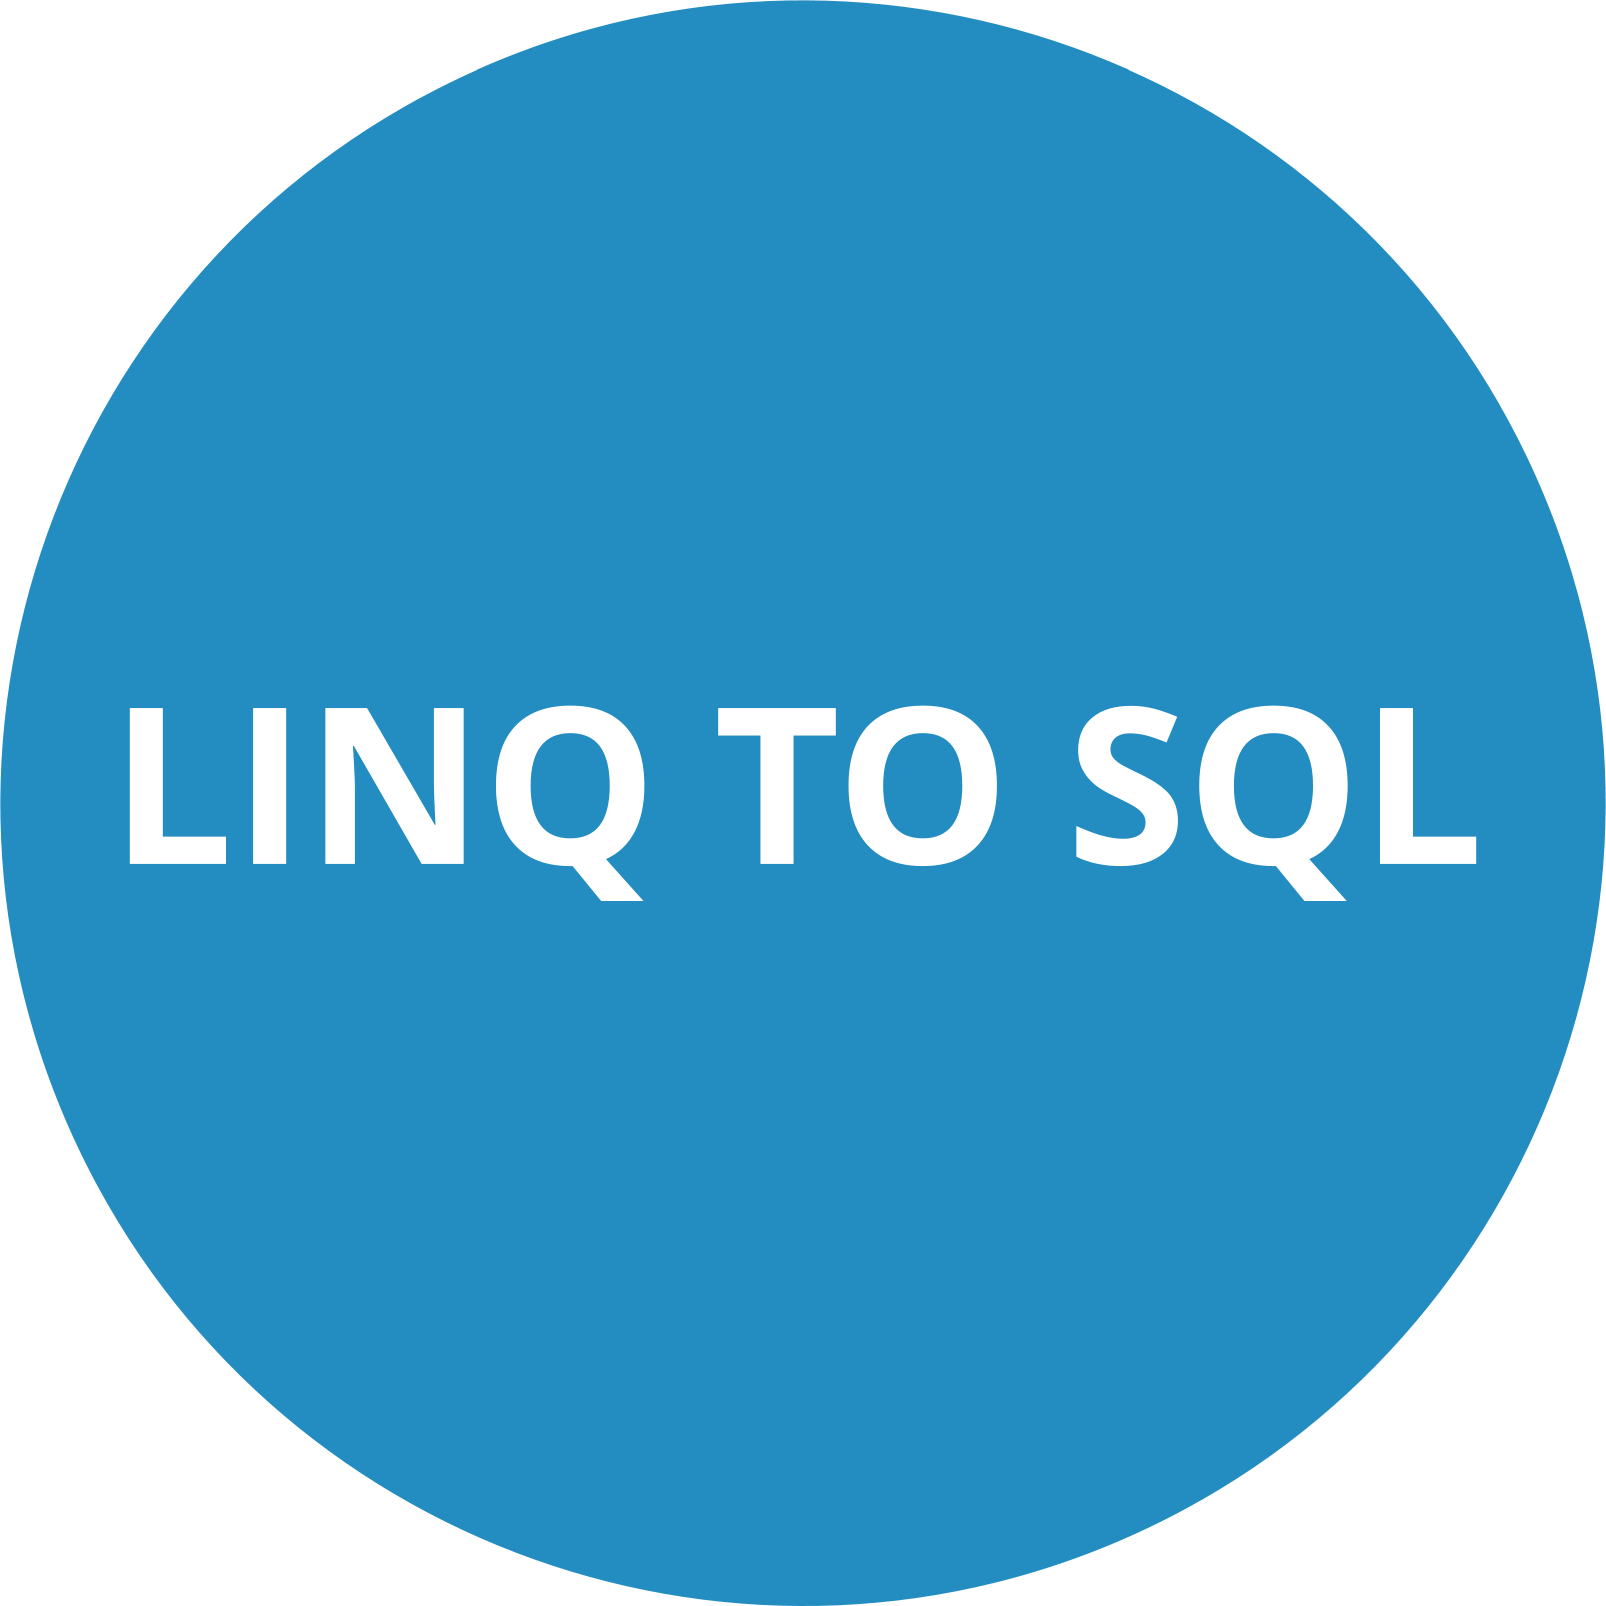 LINQ to SQL